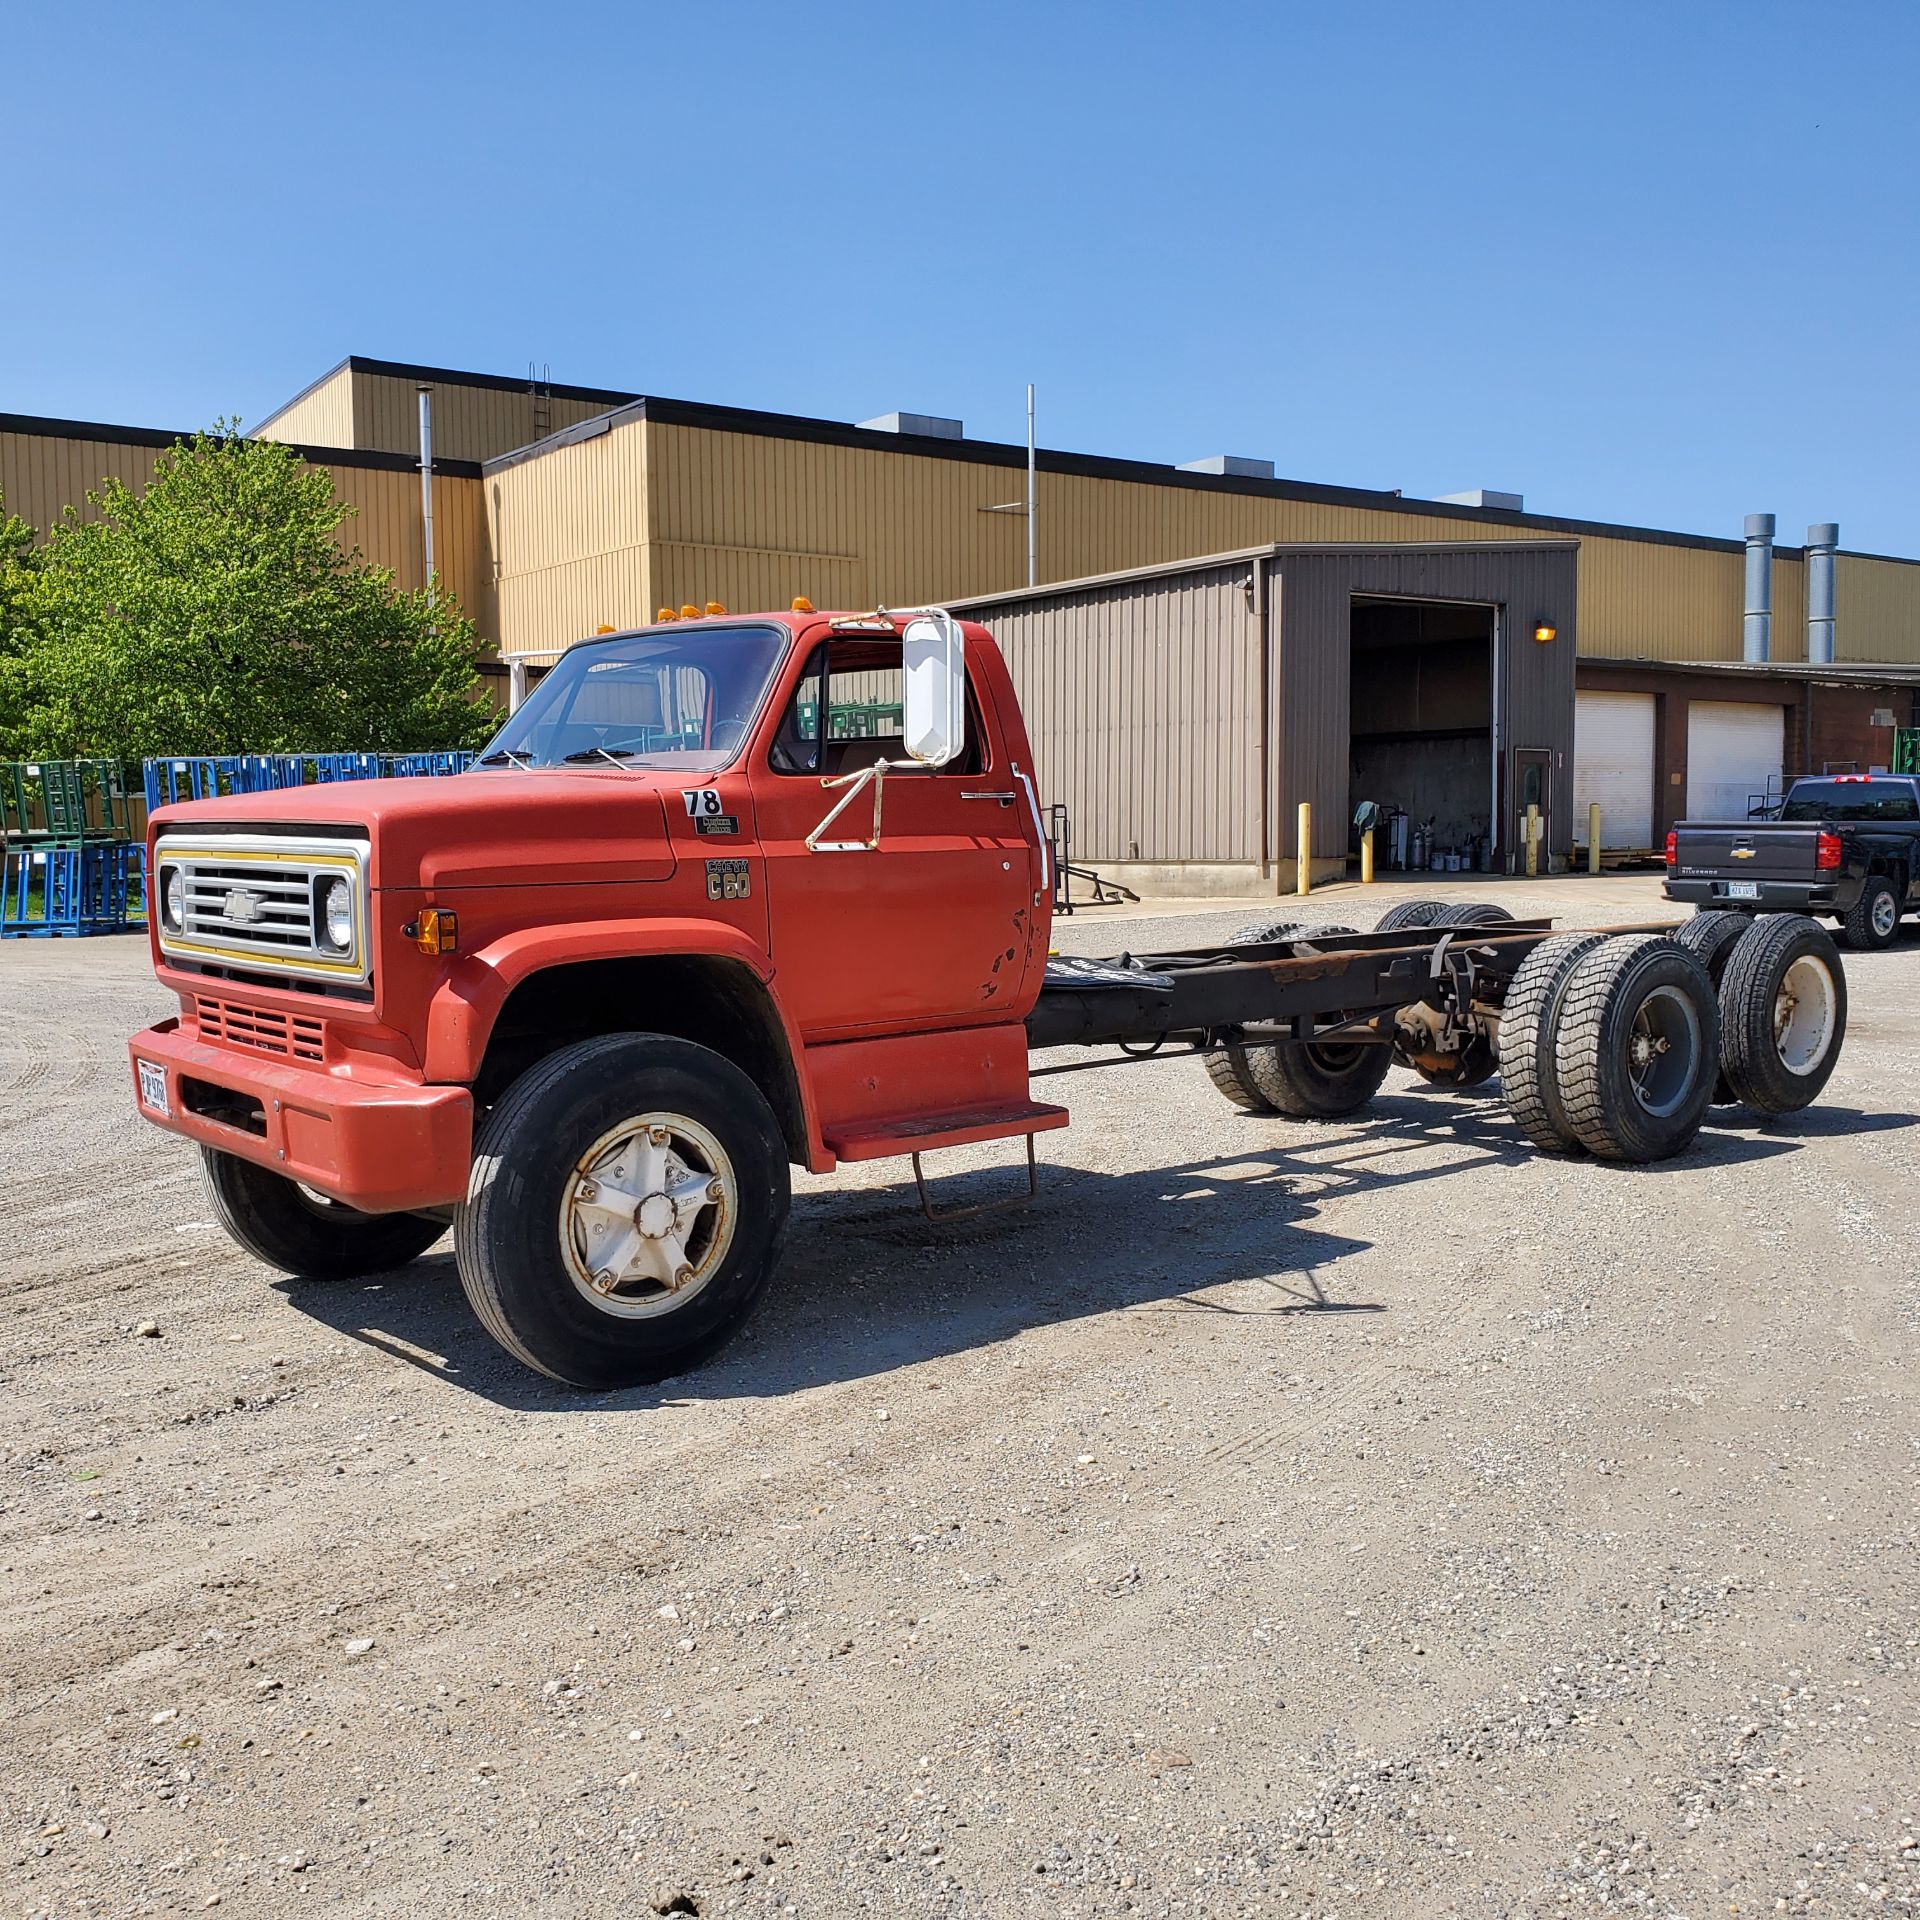 1977 Chevrolet C60 Cab and Chassis, Single Axle w/ Dual Tires and Tag Axle, 5 Speed Transmission